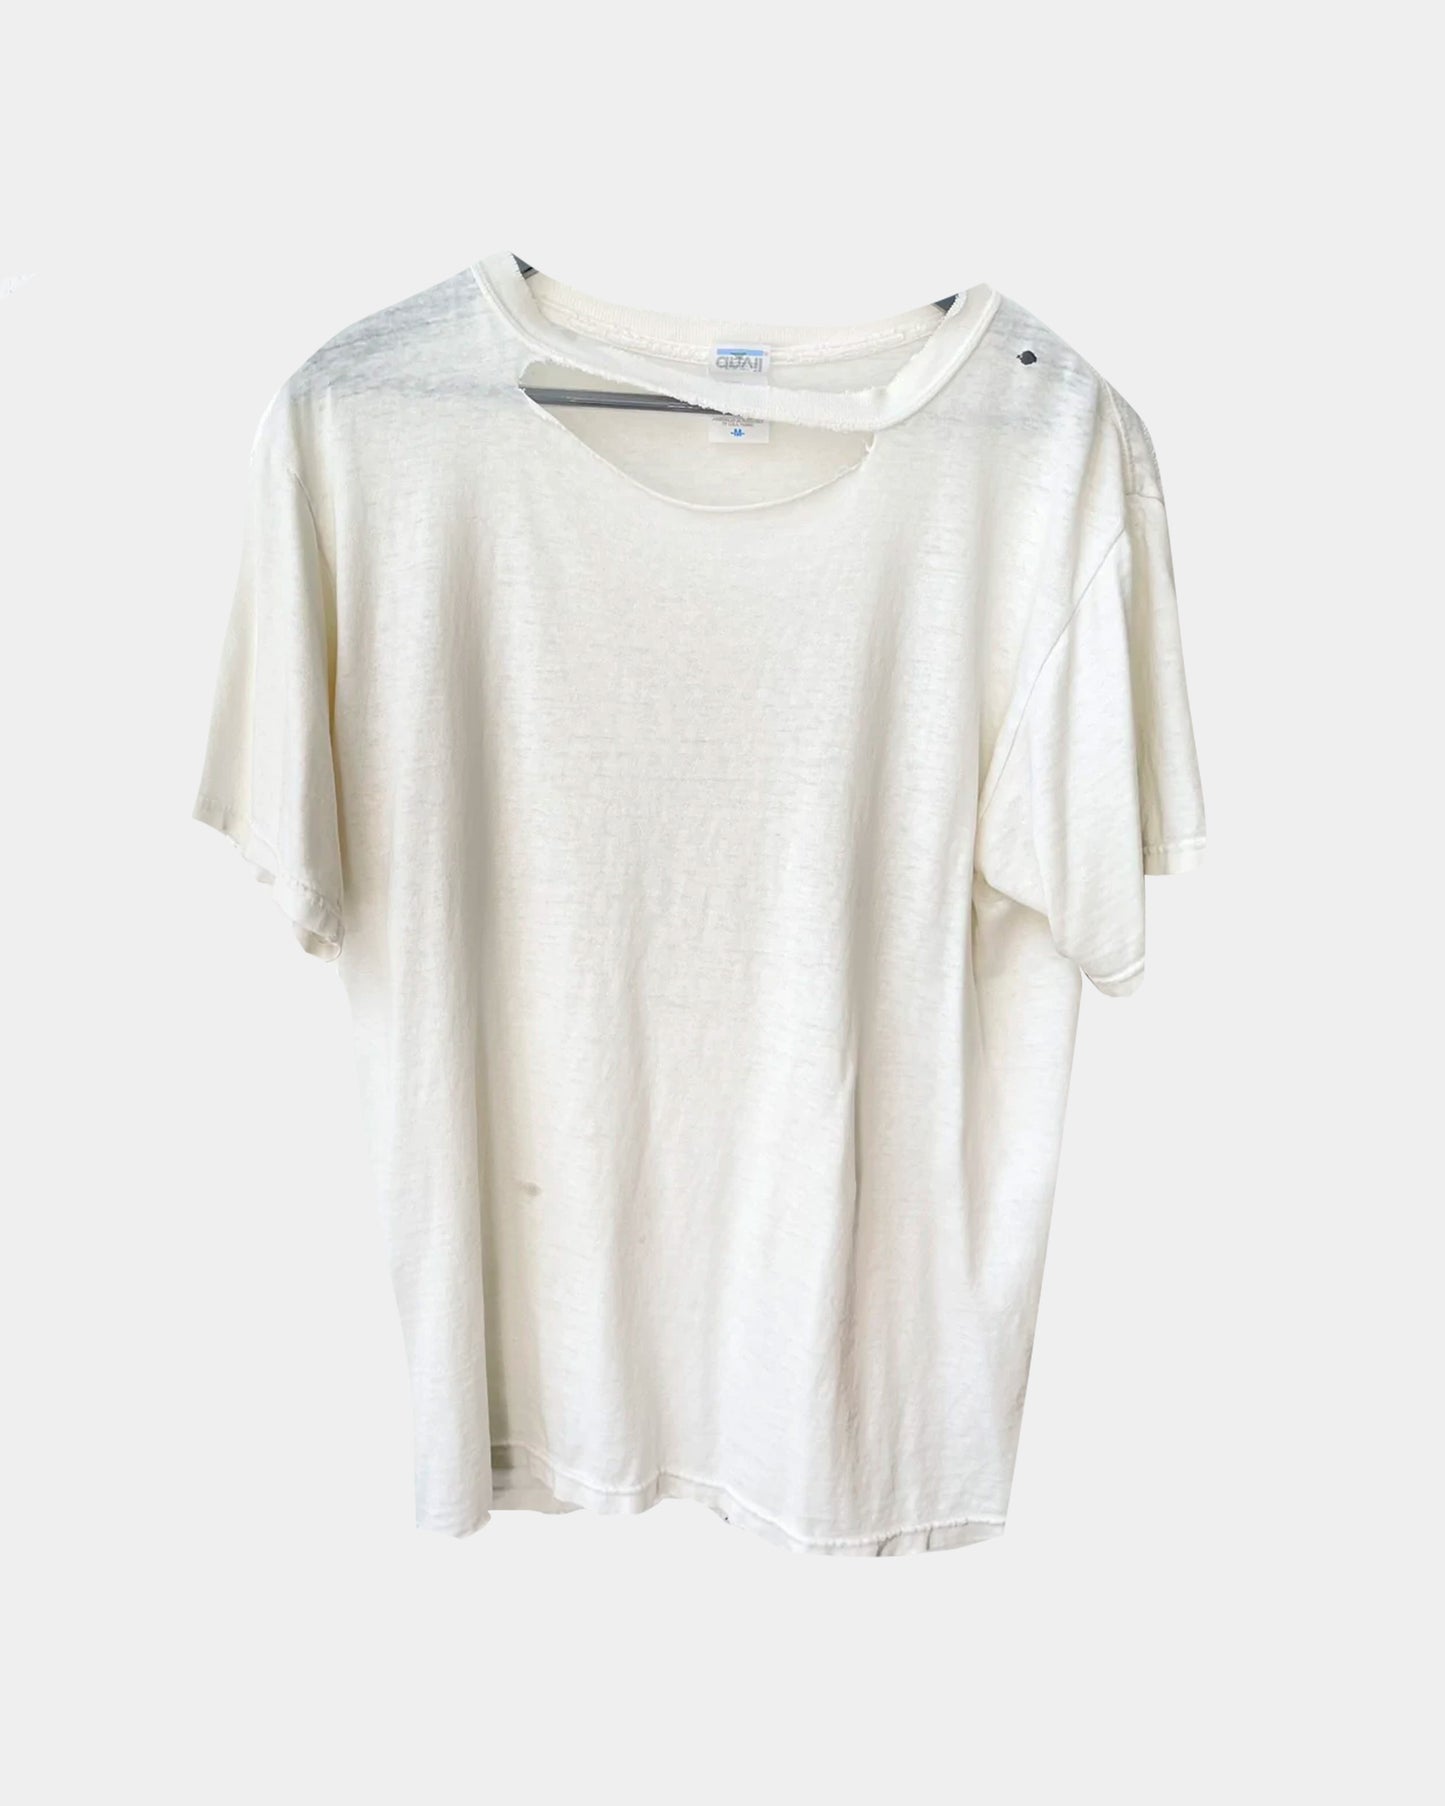 Vintage 90s THRASHED PAPER THIN BLANK WHITE SHIRT 4Gseller